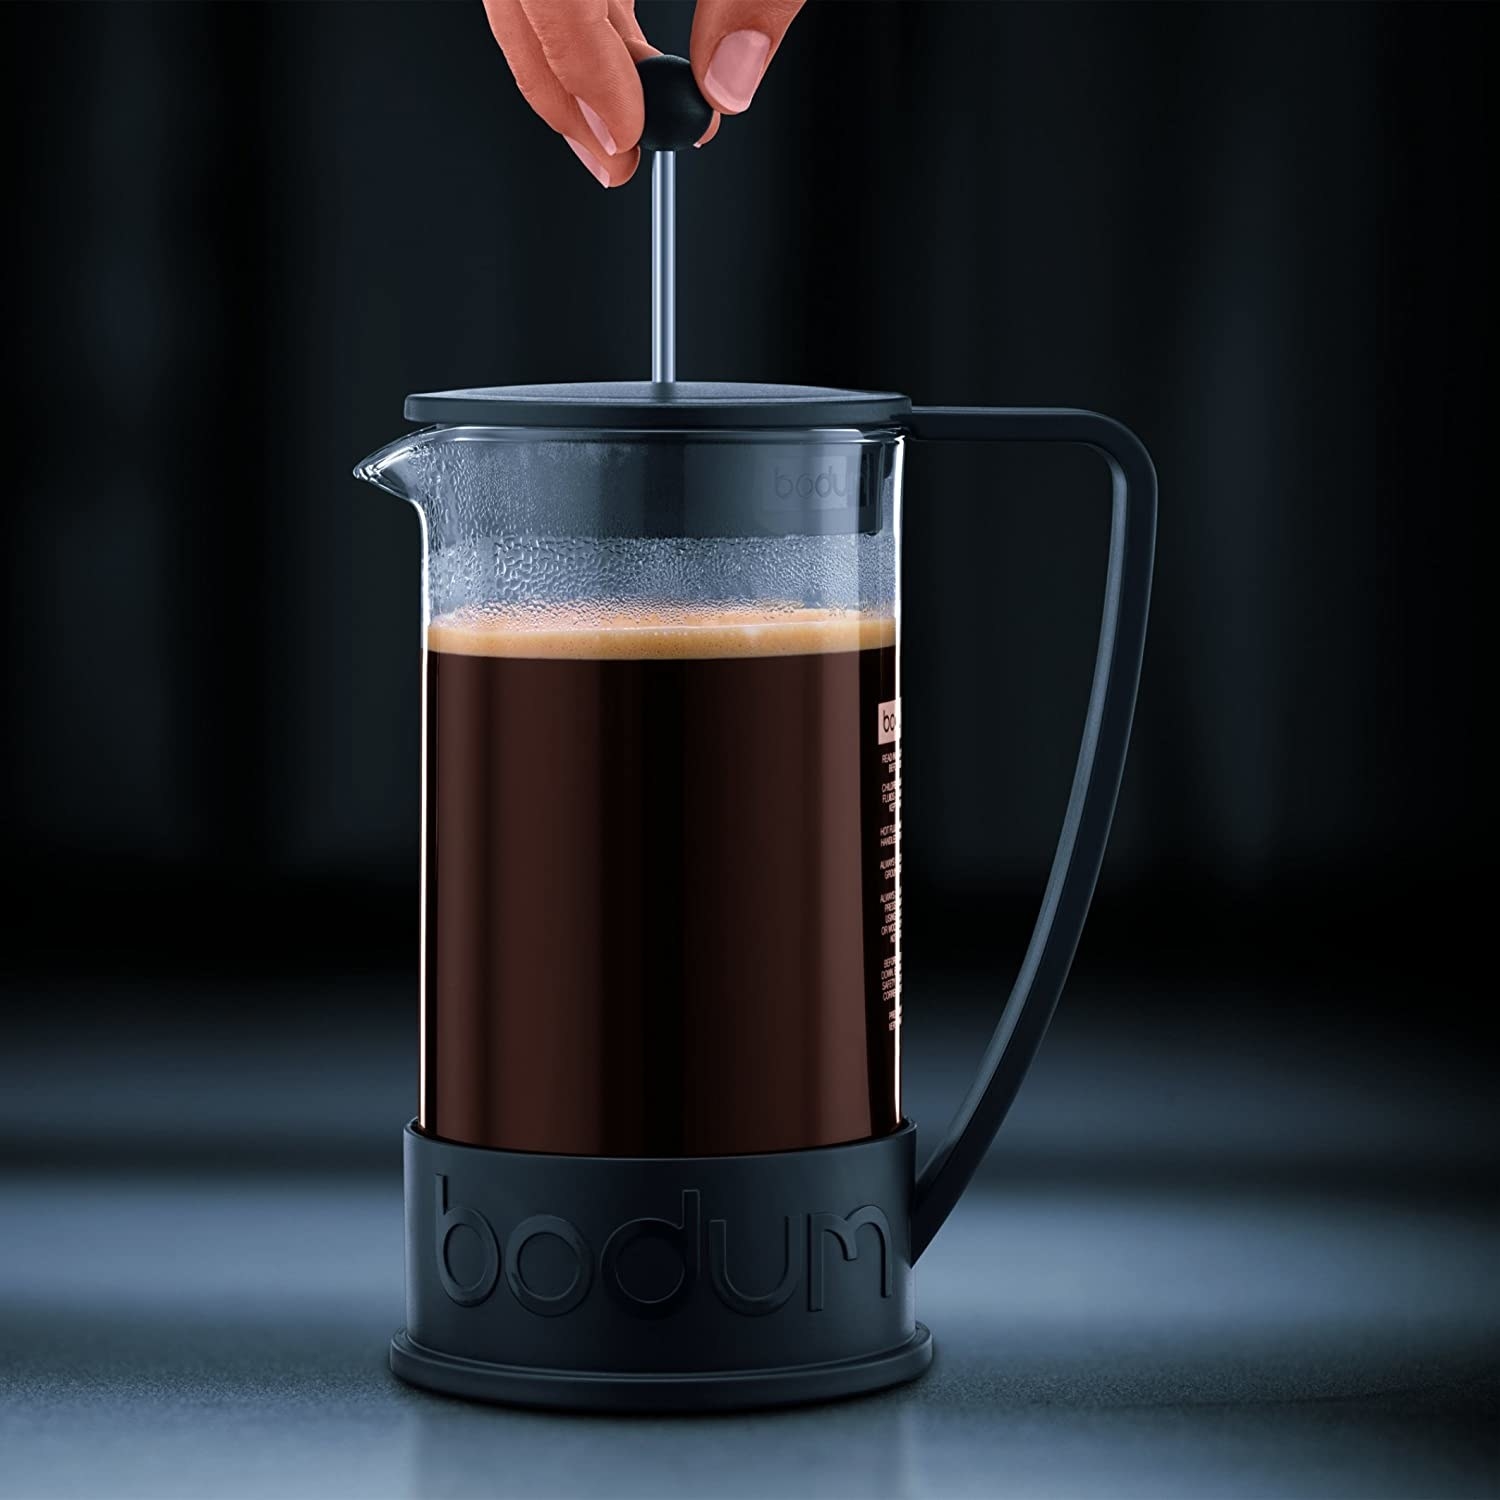 A french press full of coffee